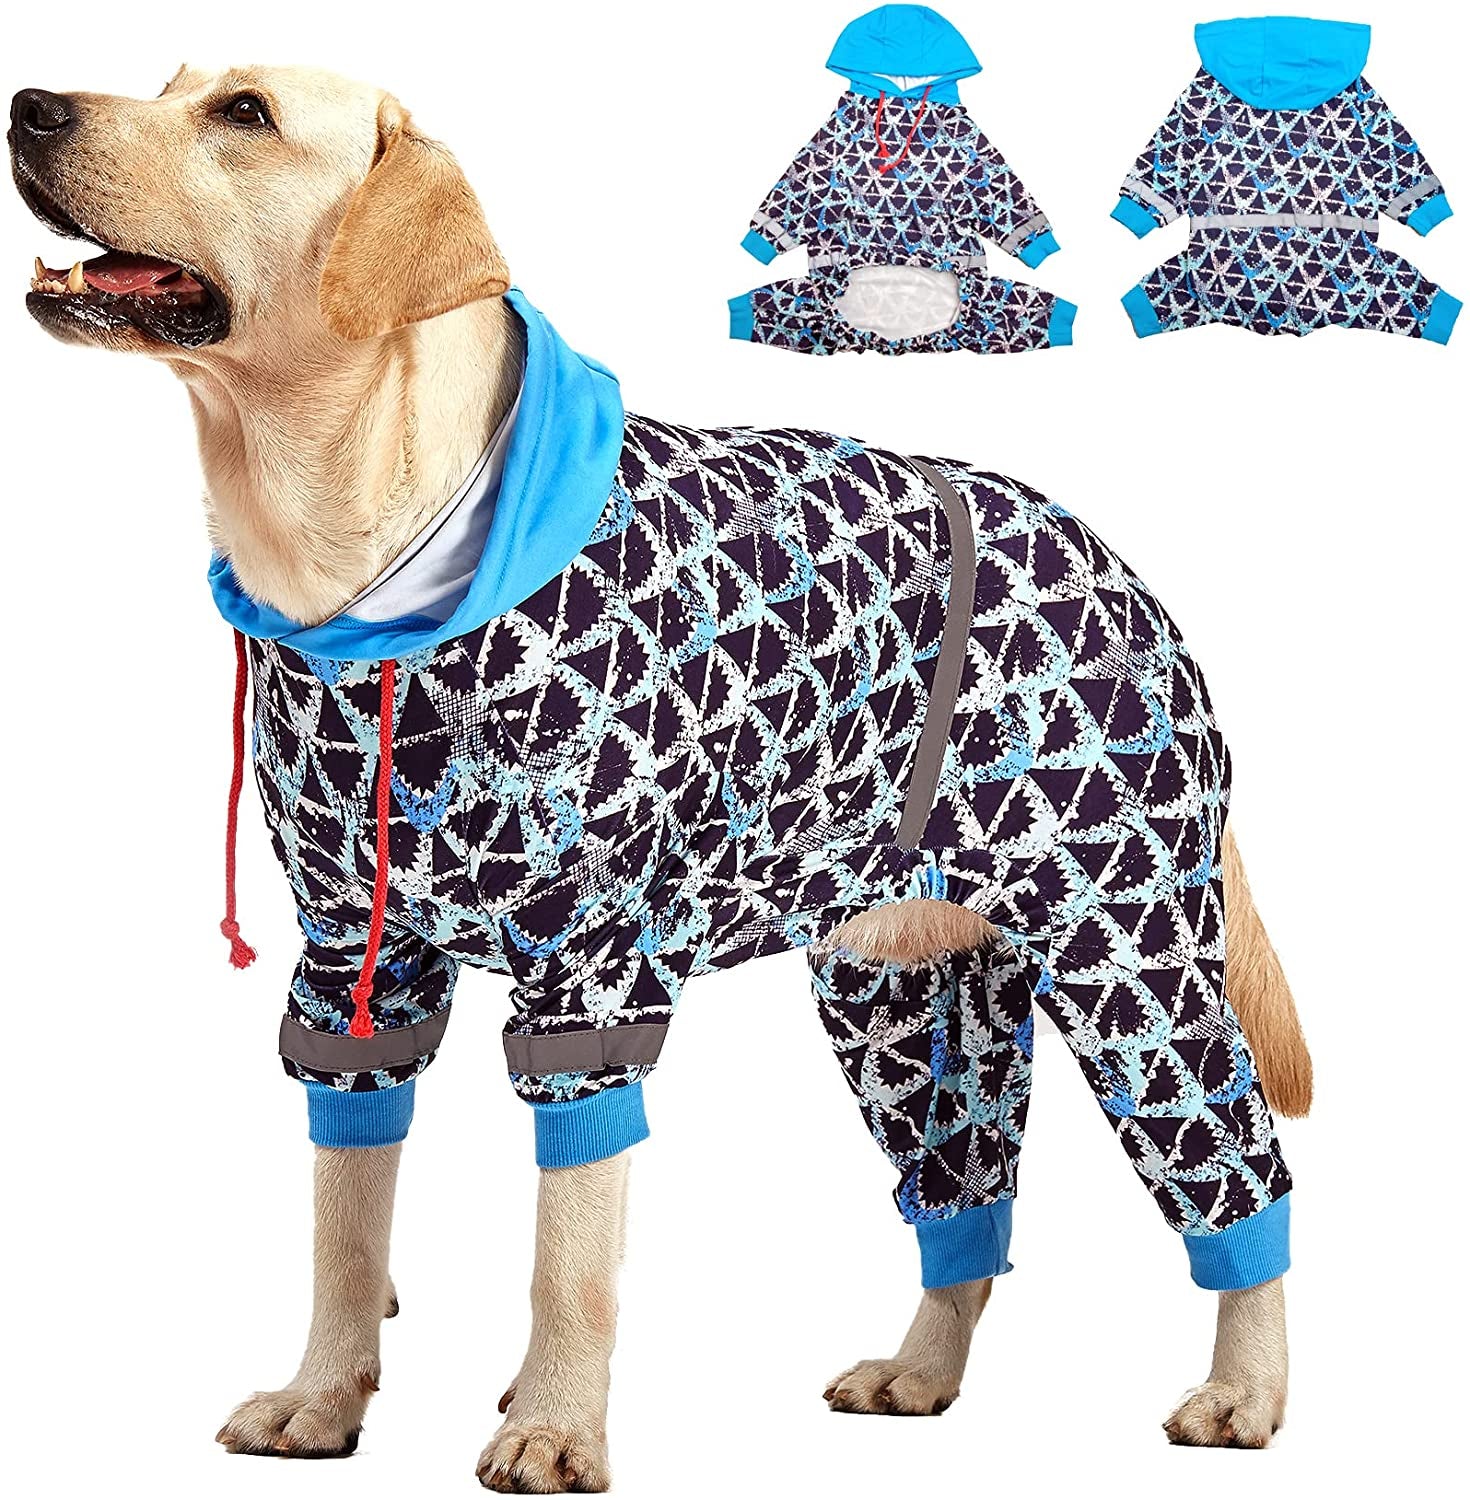 Lovinpet Large Pitbull Dogs Onesies - Wound Care/Post Surgery Dog Clothes,Anxiety Relief Shirt for Dogs, Large Breed Dog Jammies, Lightweight Stretchy,Reflective Stripe,Brown Shark Print, Pet Pj'S/Xl Animals & Pet Supplies > Pet Supplies > Dog Supplies > Dog Apparel LovinPet Blue Large 